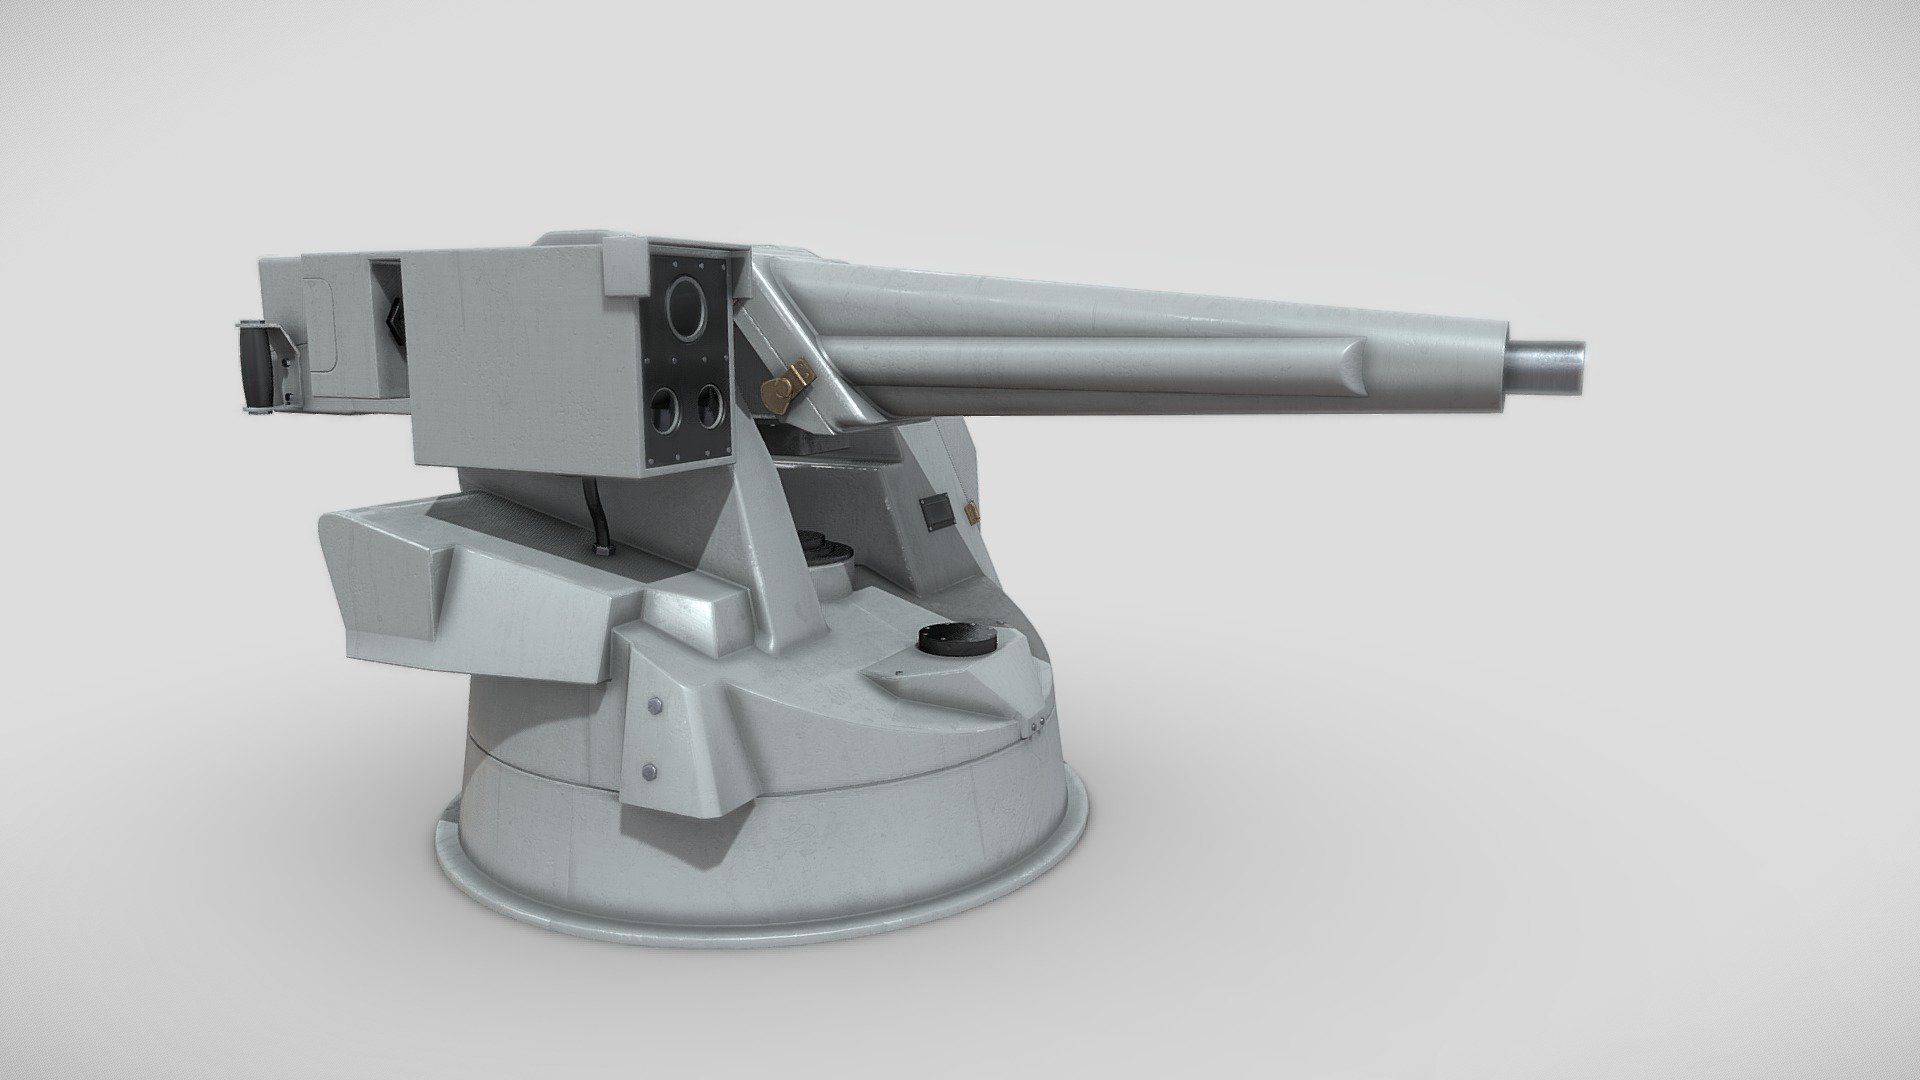 The Hitrole is a remote weapons station manufactured by Italian arms company Oto Melara.

This 3D model was created using 3ds Max, with textures designed in Substance Painter. The model has been meticulously unwrapped and divided into separate parts, enabling the base and turret to rotate seamlessly. If necessary, I am also capable of exporting the textures in various formats suitable for Unity, Unreal Engine, or V-Ray integration 3d model